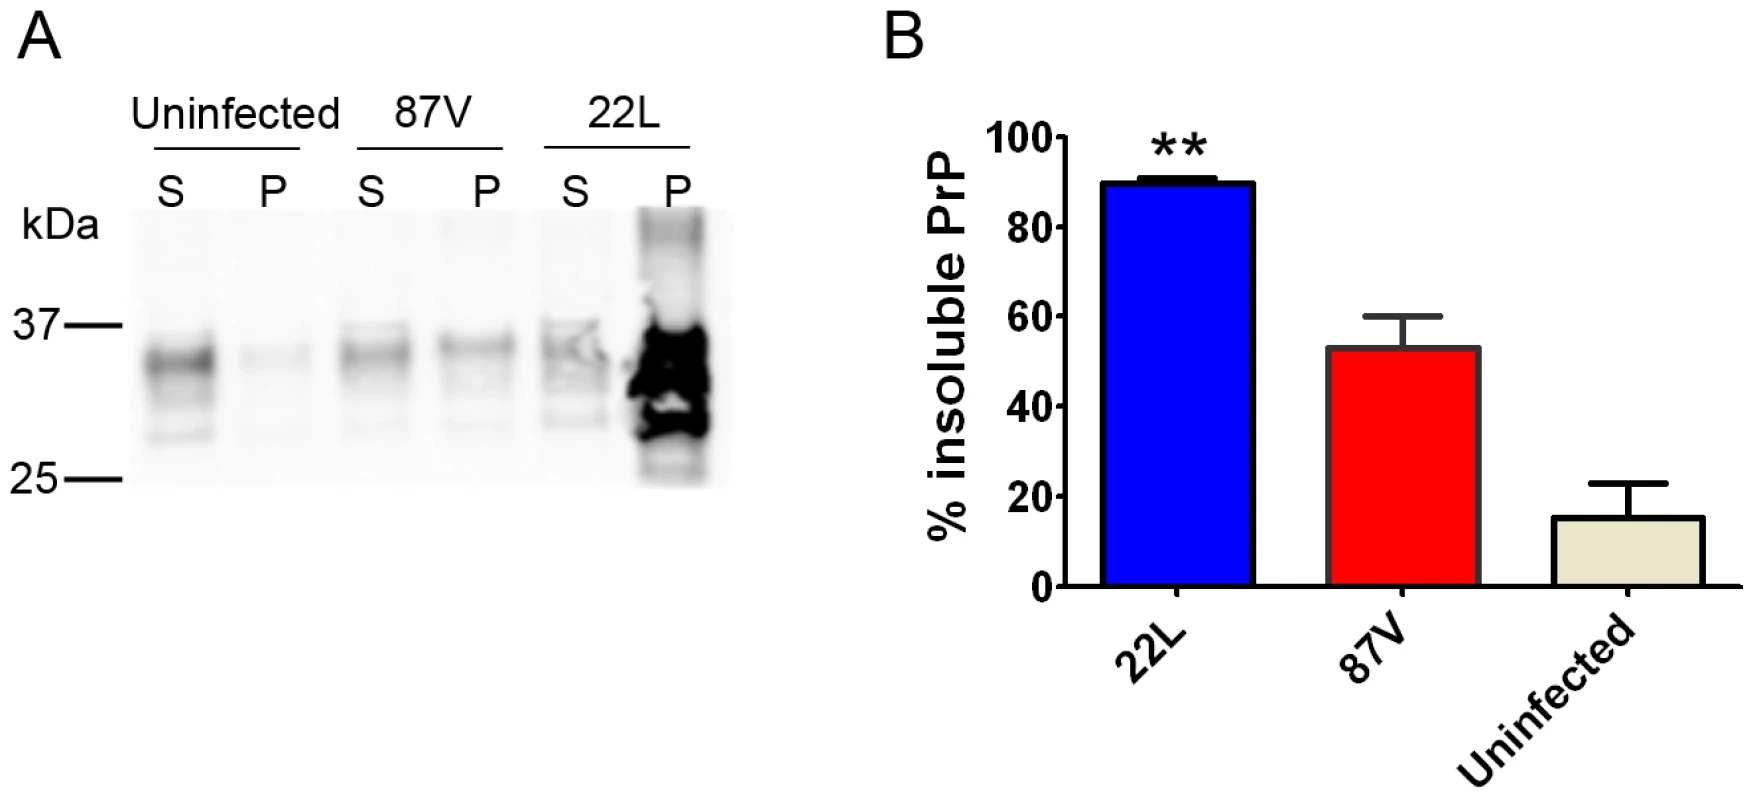 Soluble to insoluble PrP ratio varies depending on the prion strain.